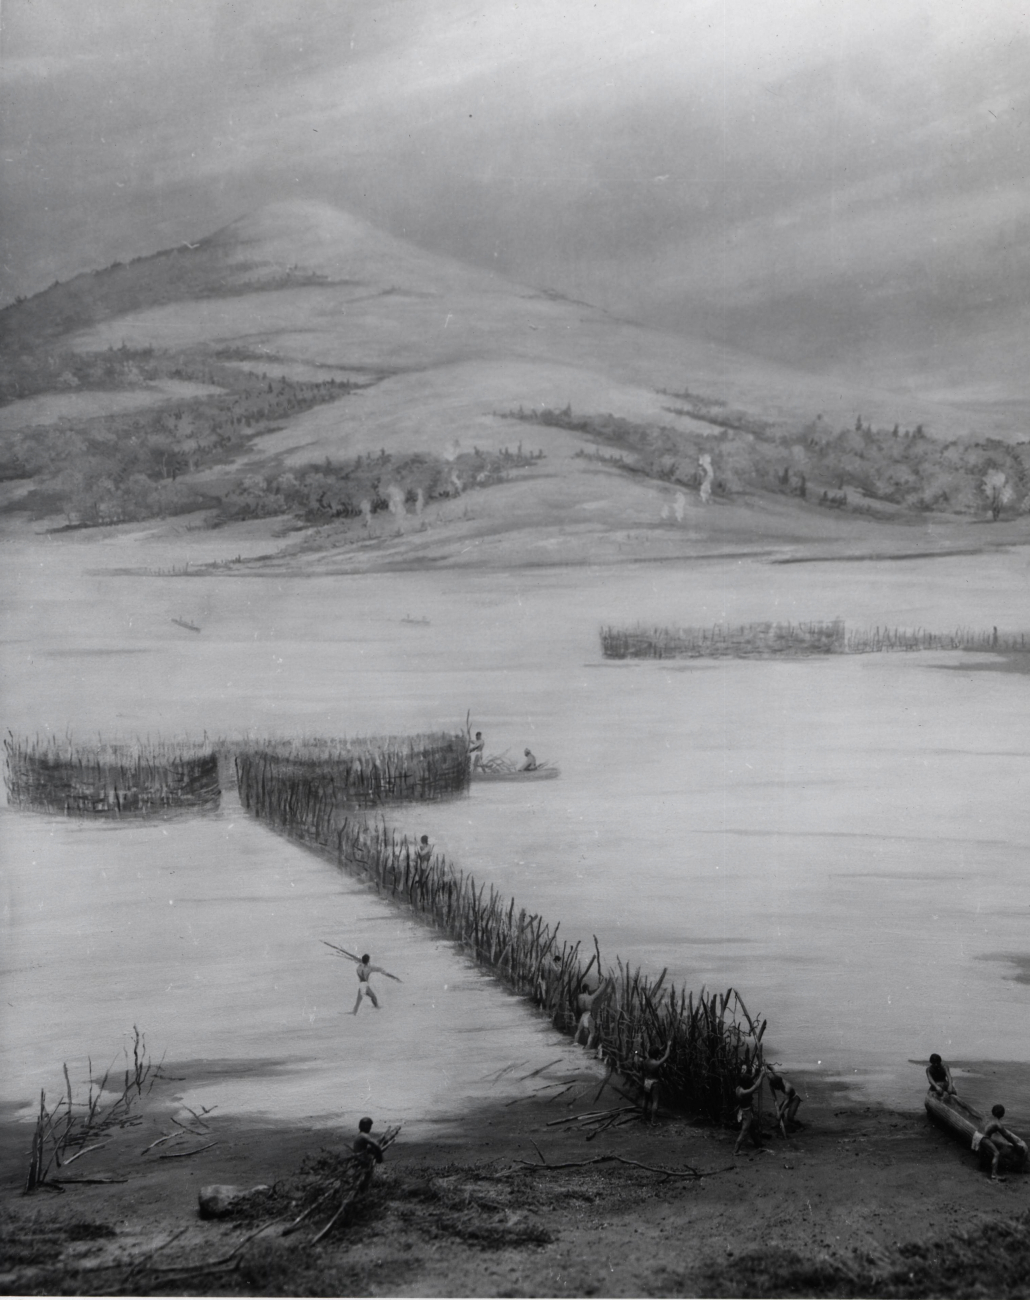 Artwork - artist's conception of native American fish traps on the west coast of North America